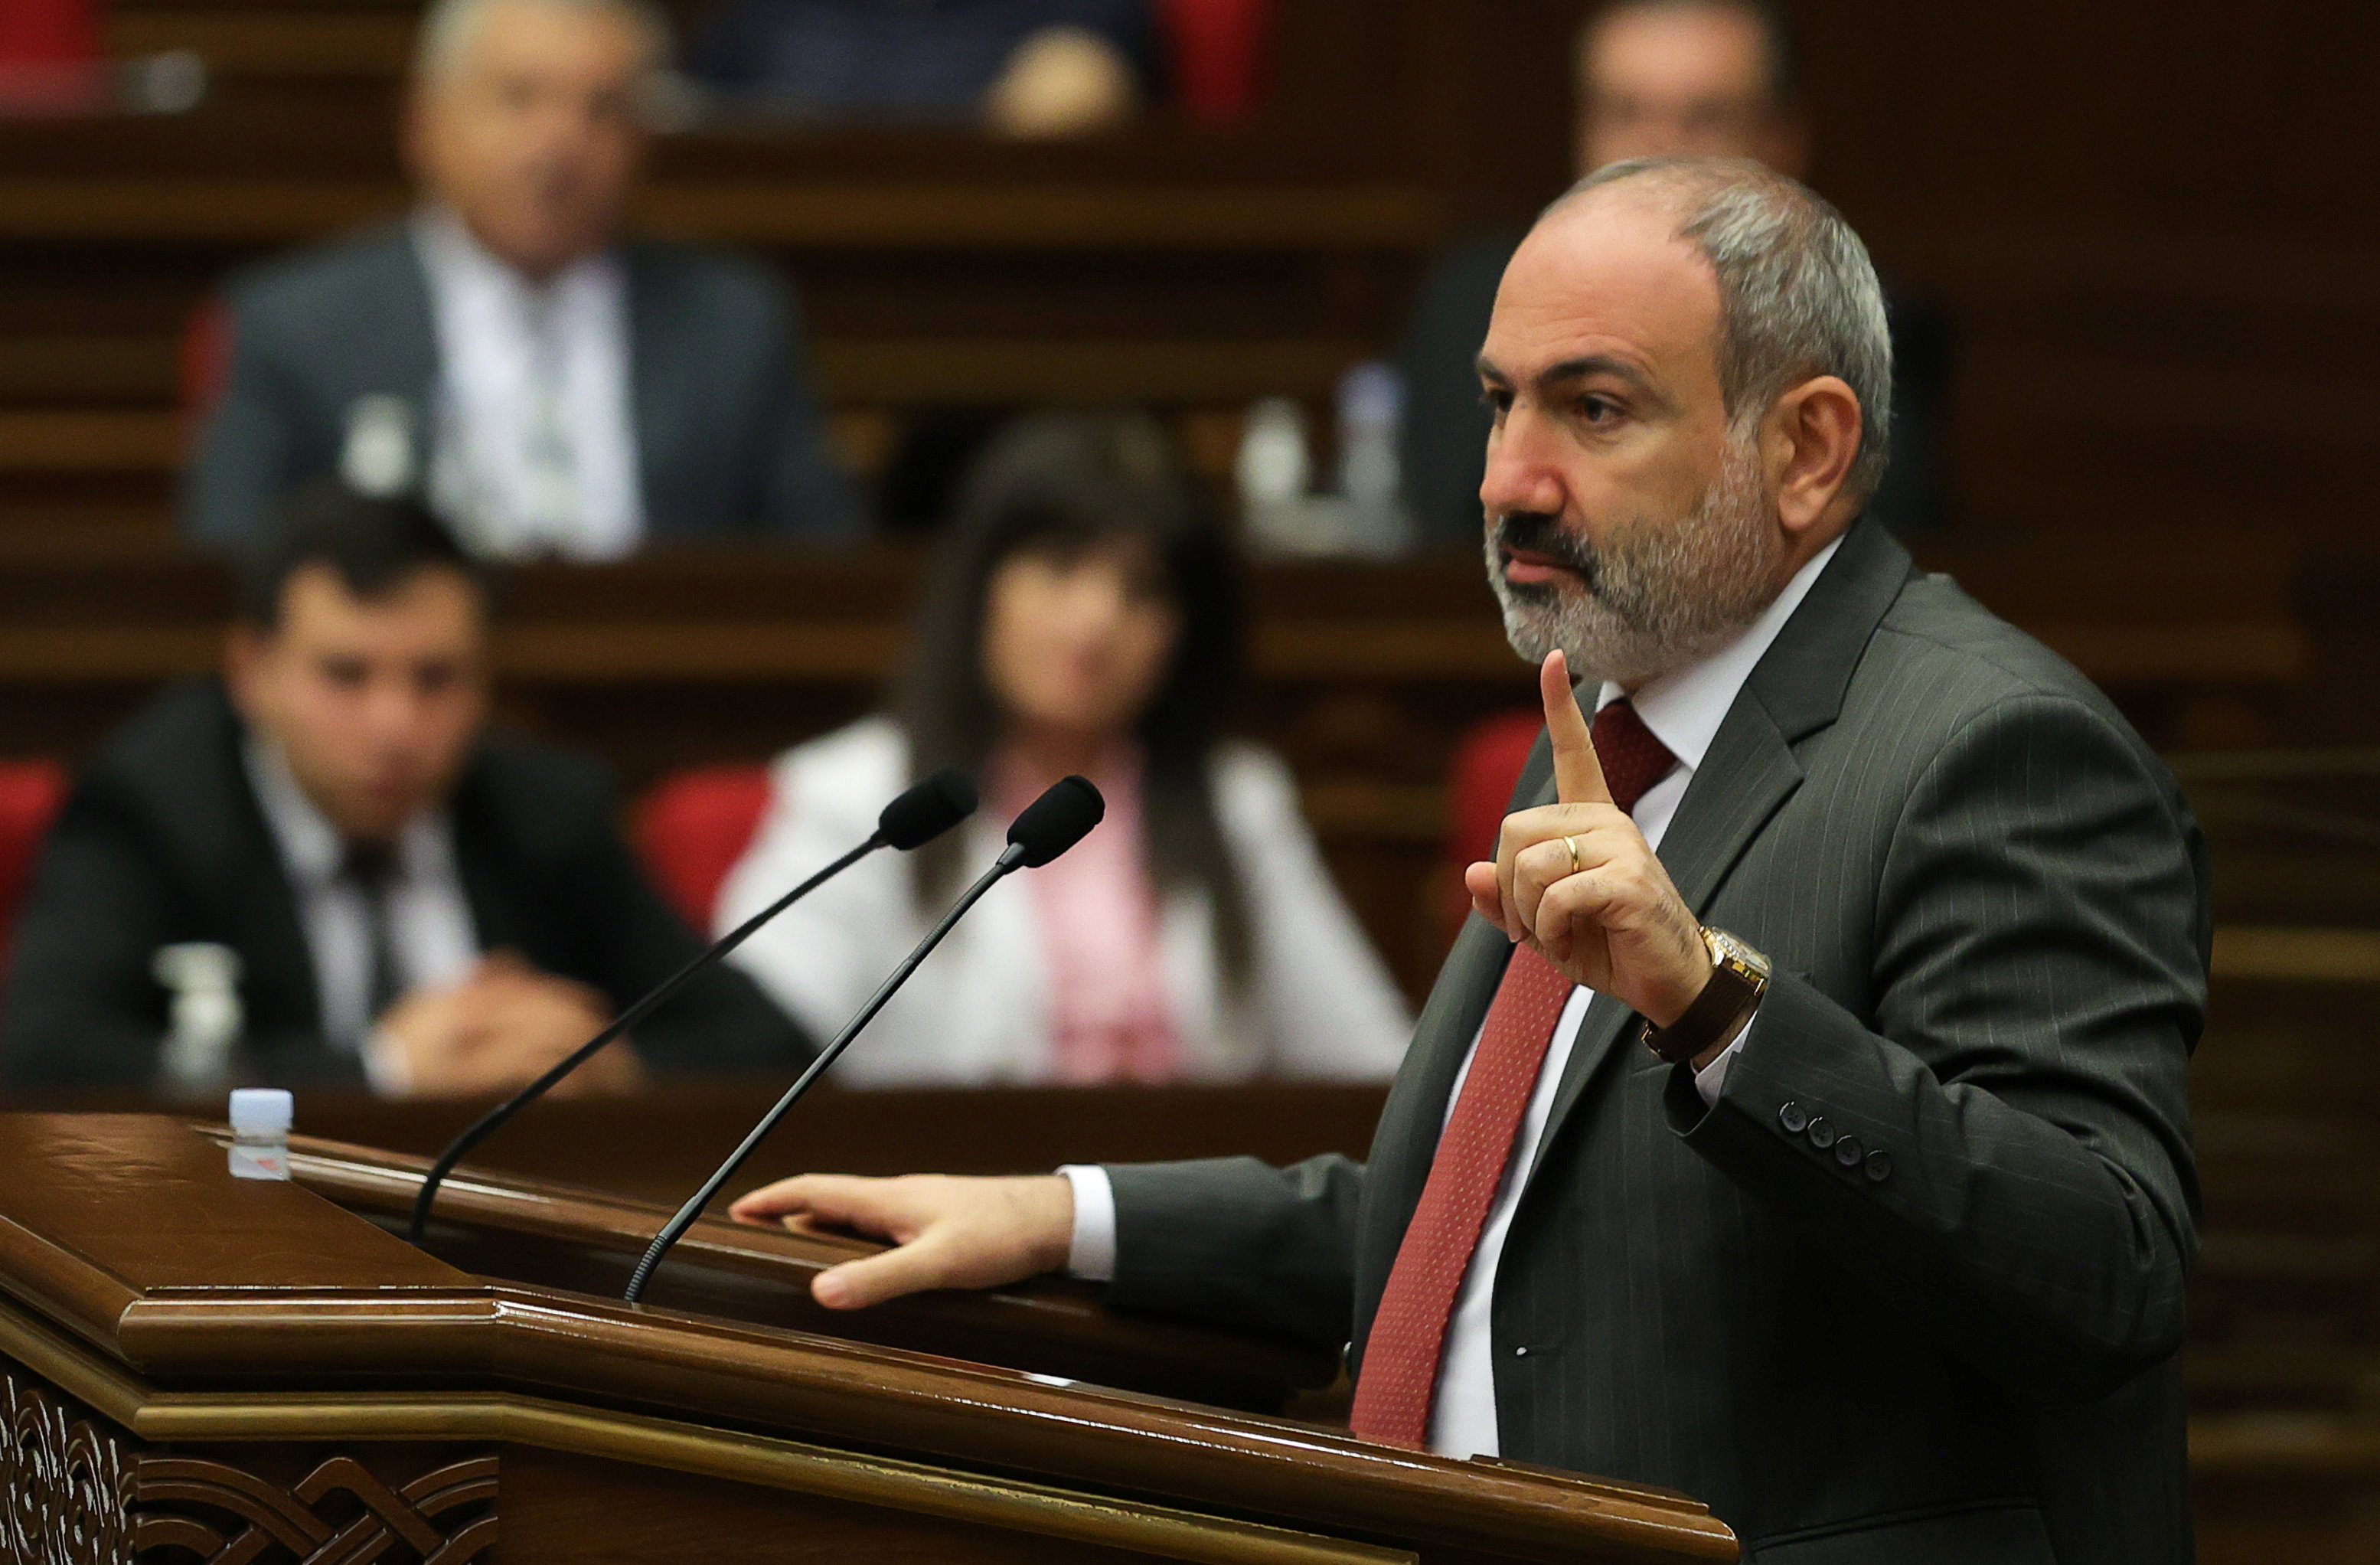 Armenia's acting Prime Minister Pashinyan speaks during a parliament session in Yerevan